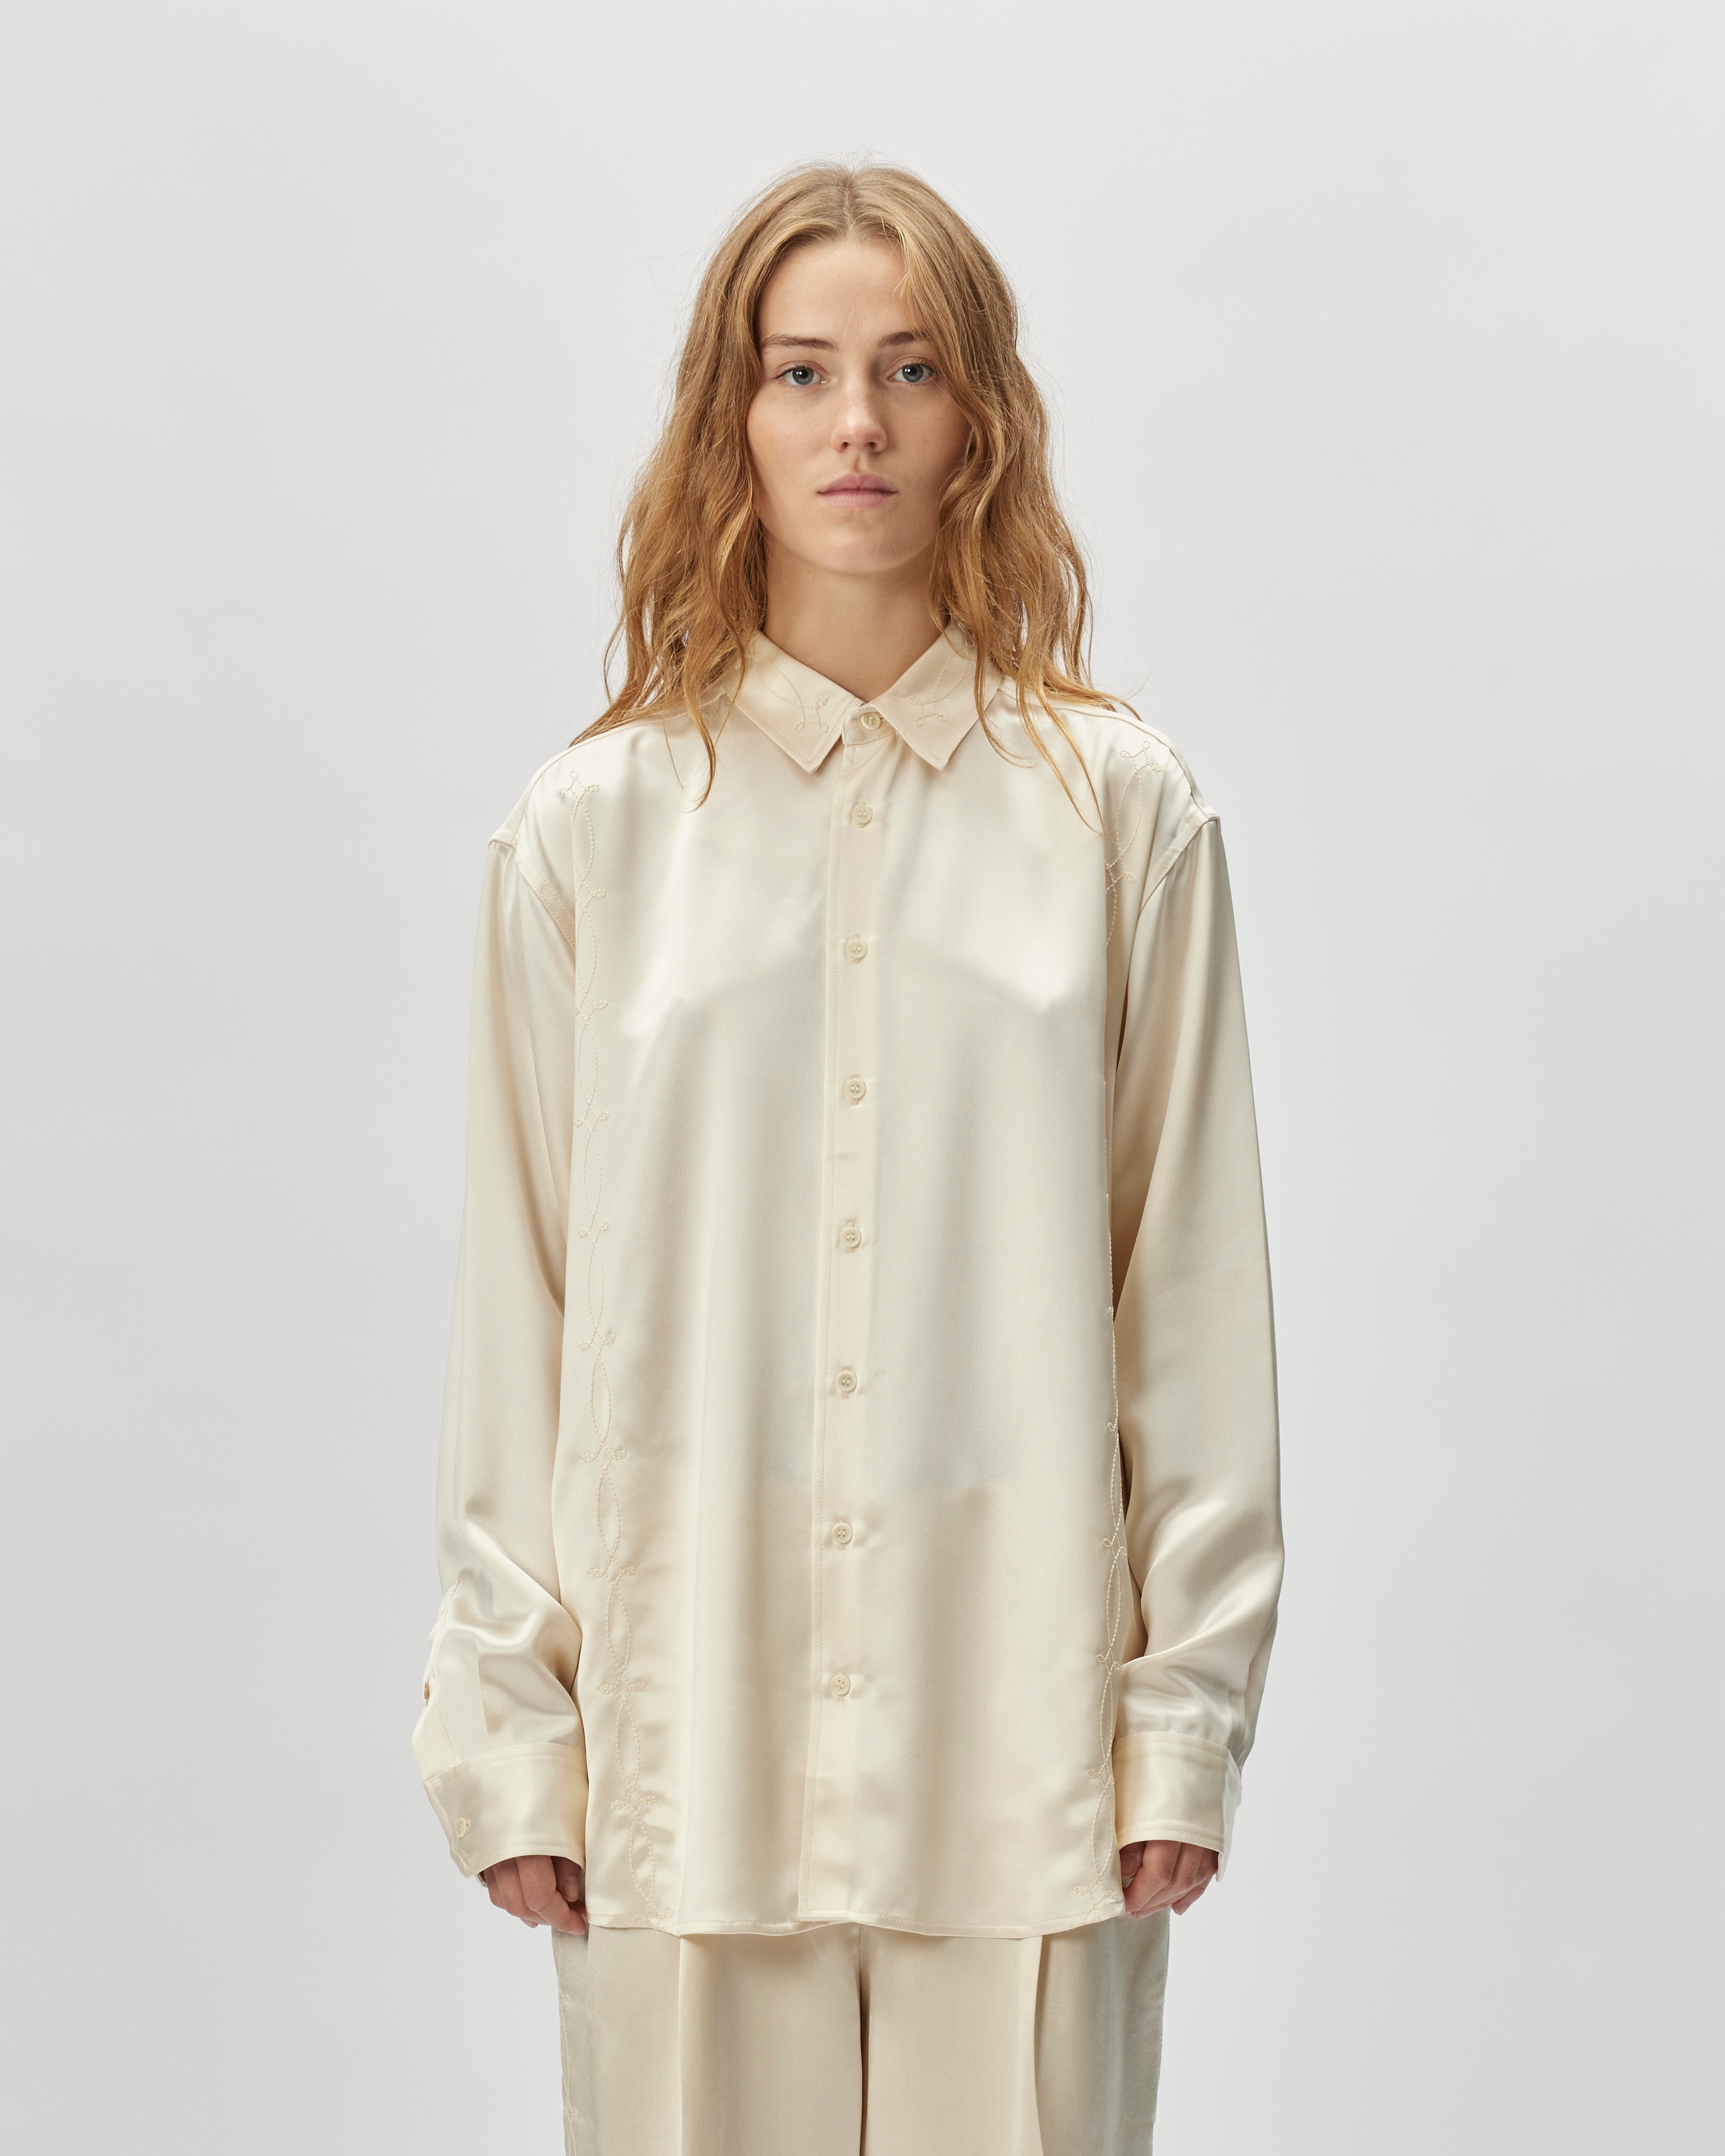 Soulland Damon Embroided Shirt Off White 32027-1225